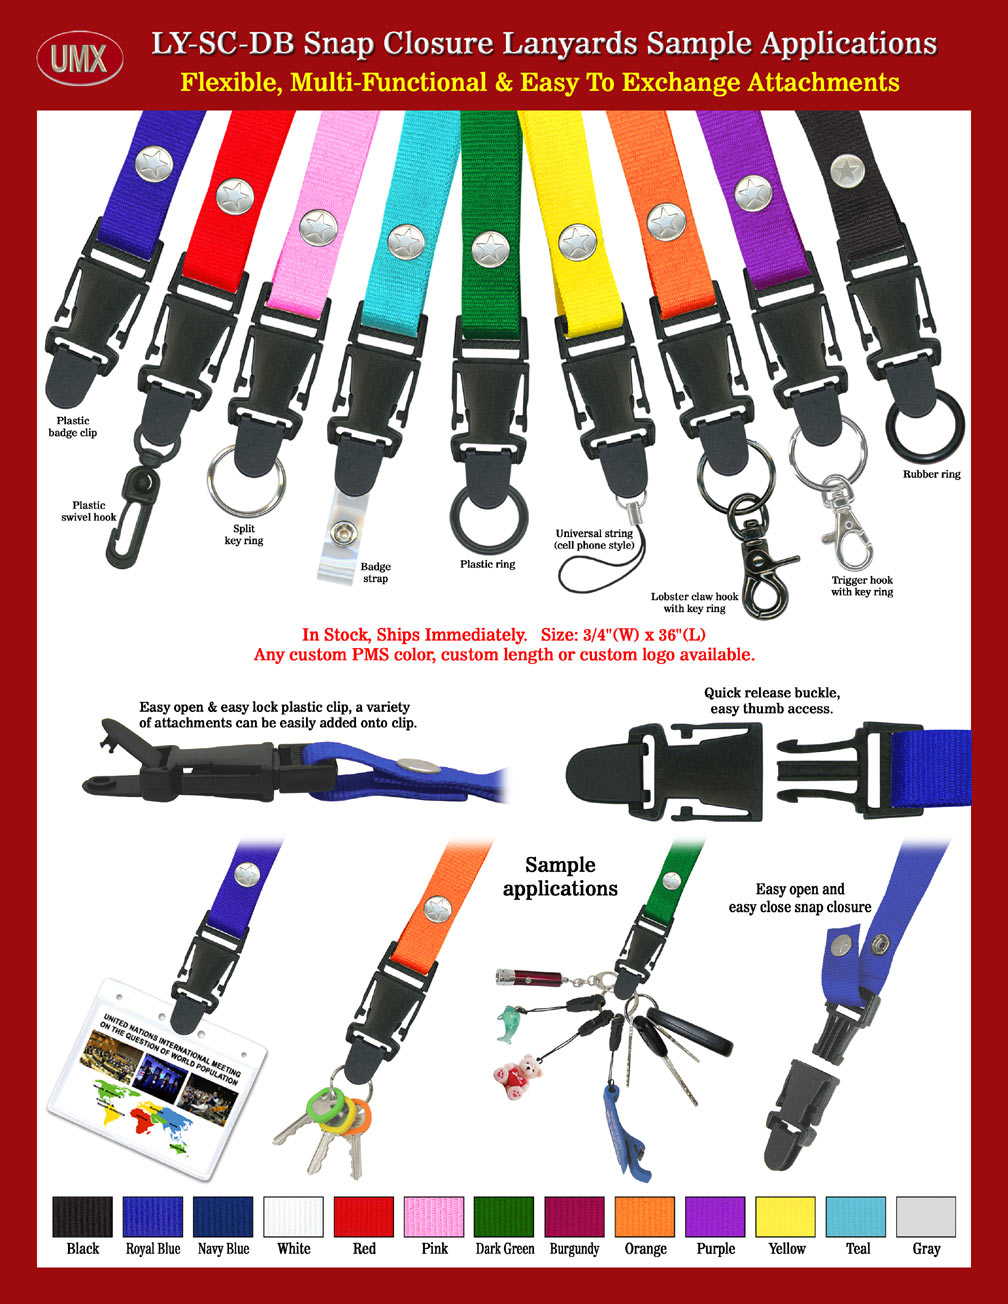 Snap-Fastener Quick Release Lanyard Samples With Application Photos